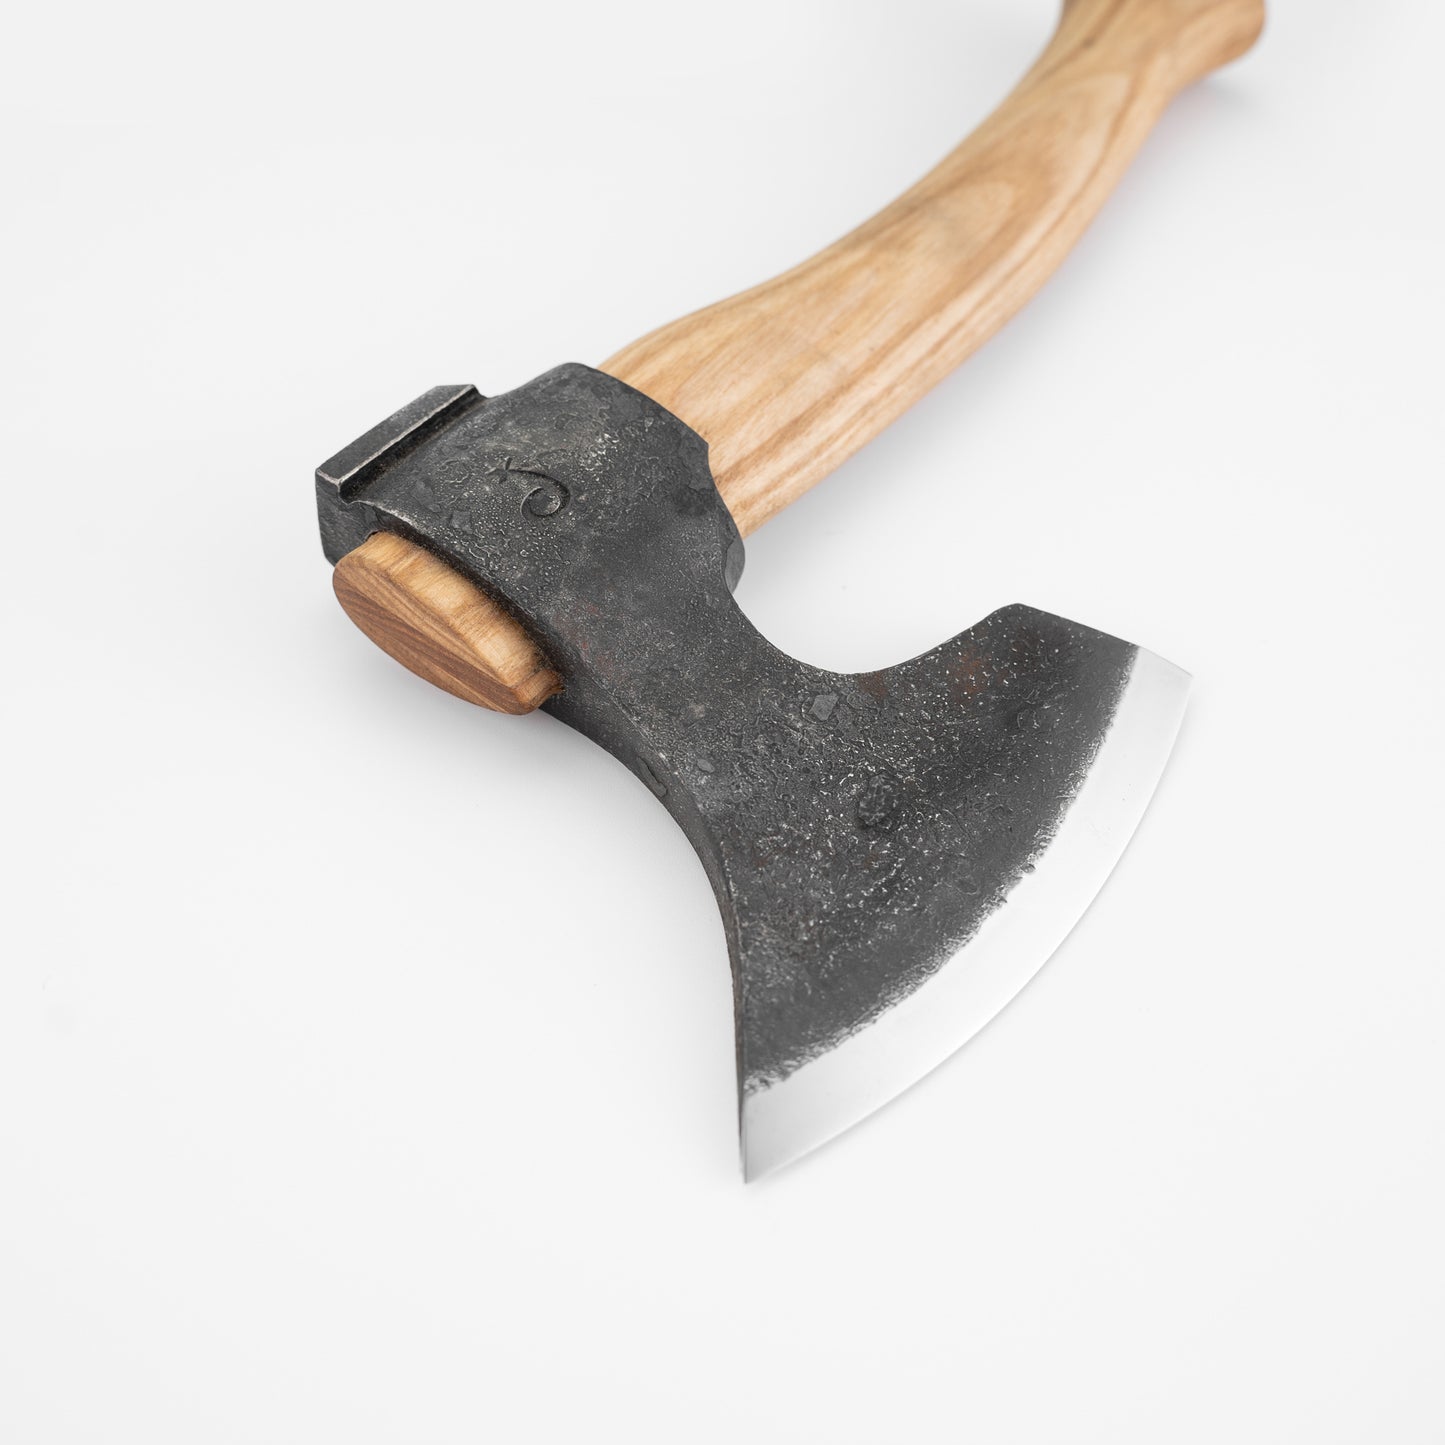 Small-Sized Carving Axe